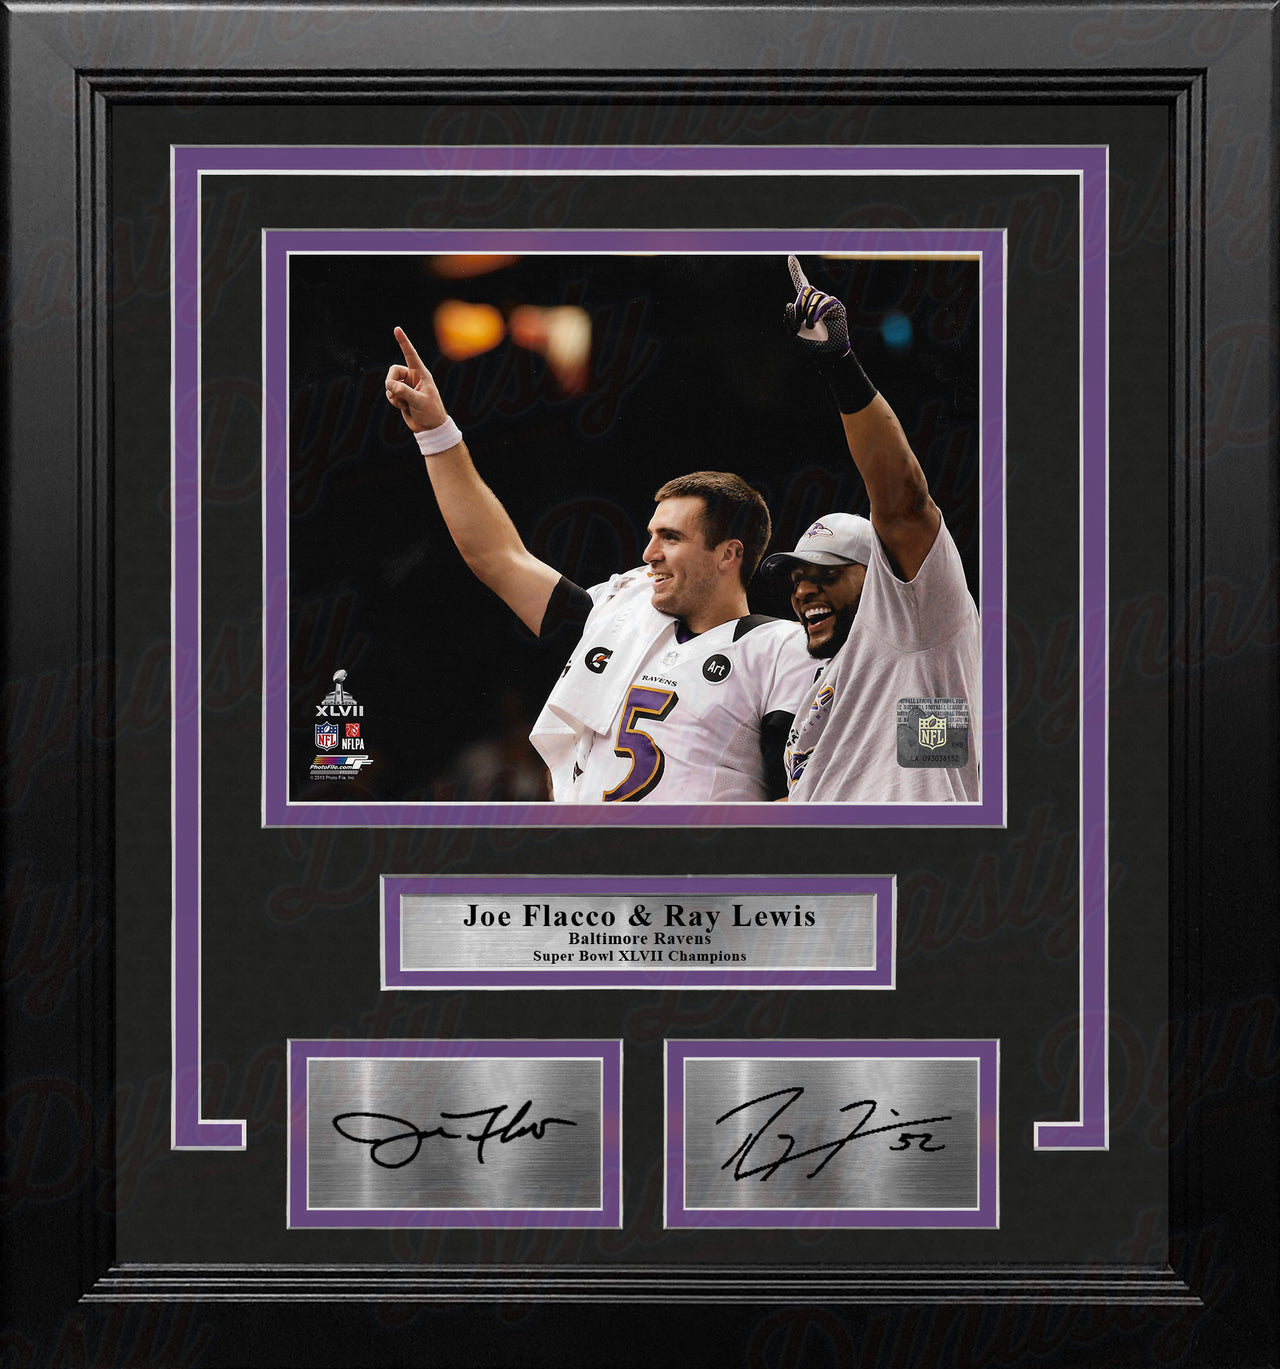 Joe Flacco & Ray Lewis Baltimore Ravens Super Bowl Champs 8x10 Framed Photo with Engraved Autographs - Dynasty Sports & Framing 